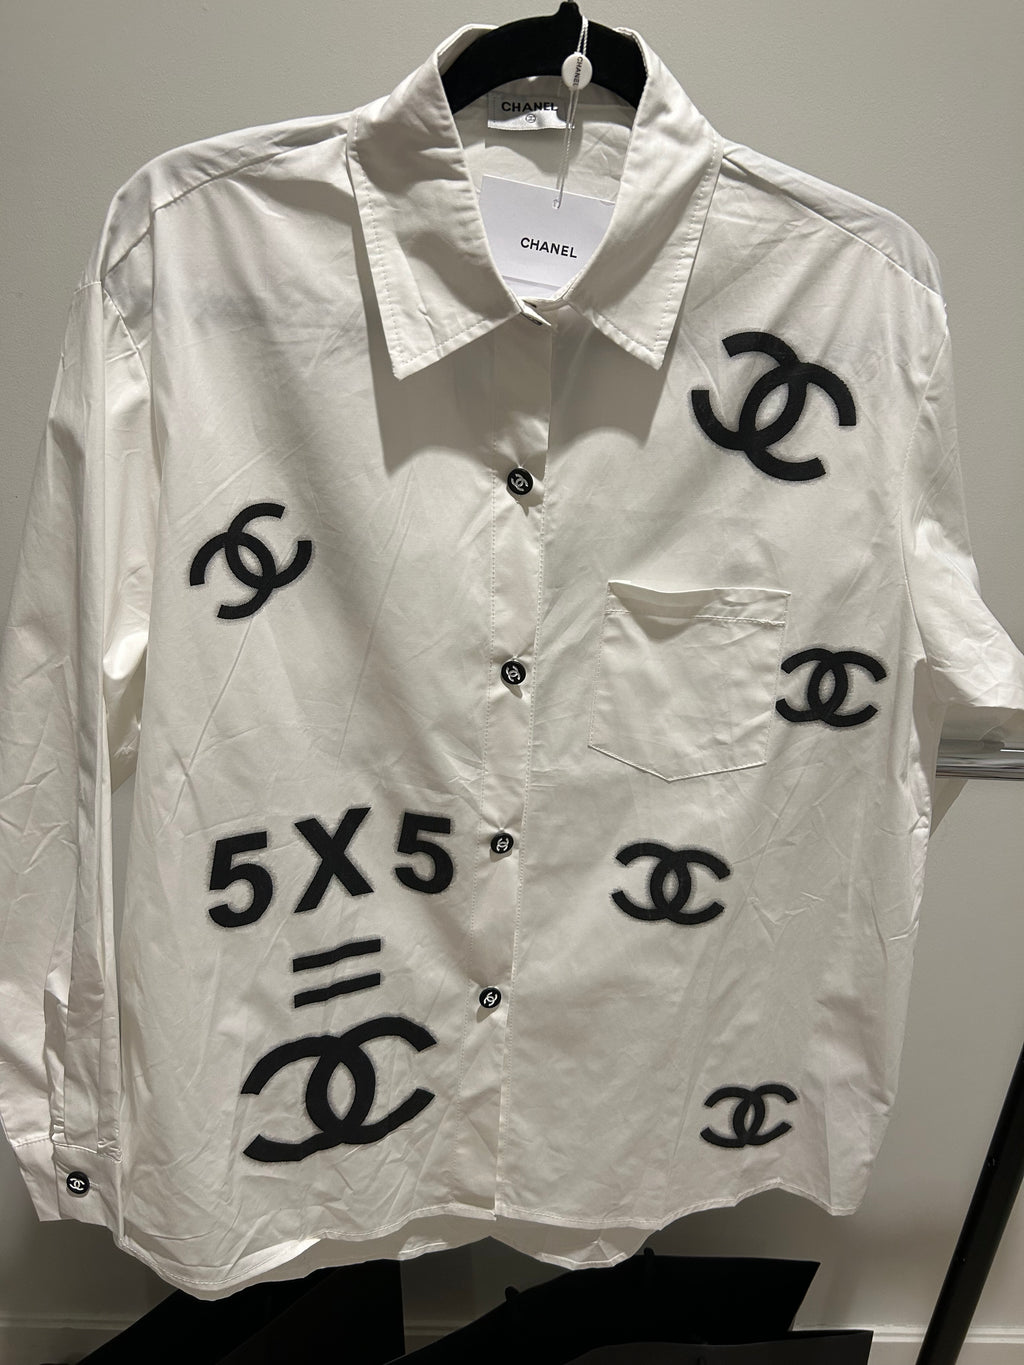 NOVELTY CC CHANEL INSPIRED TOP